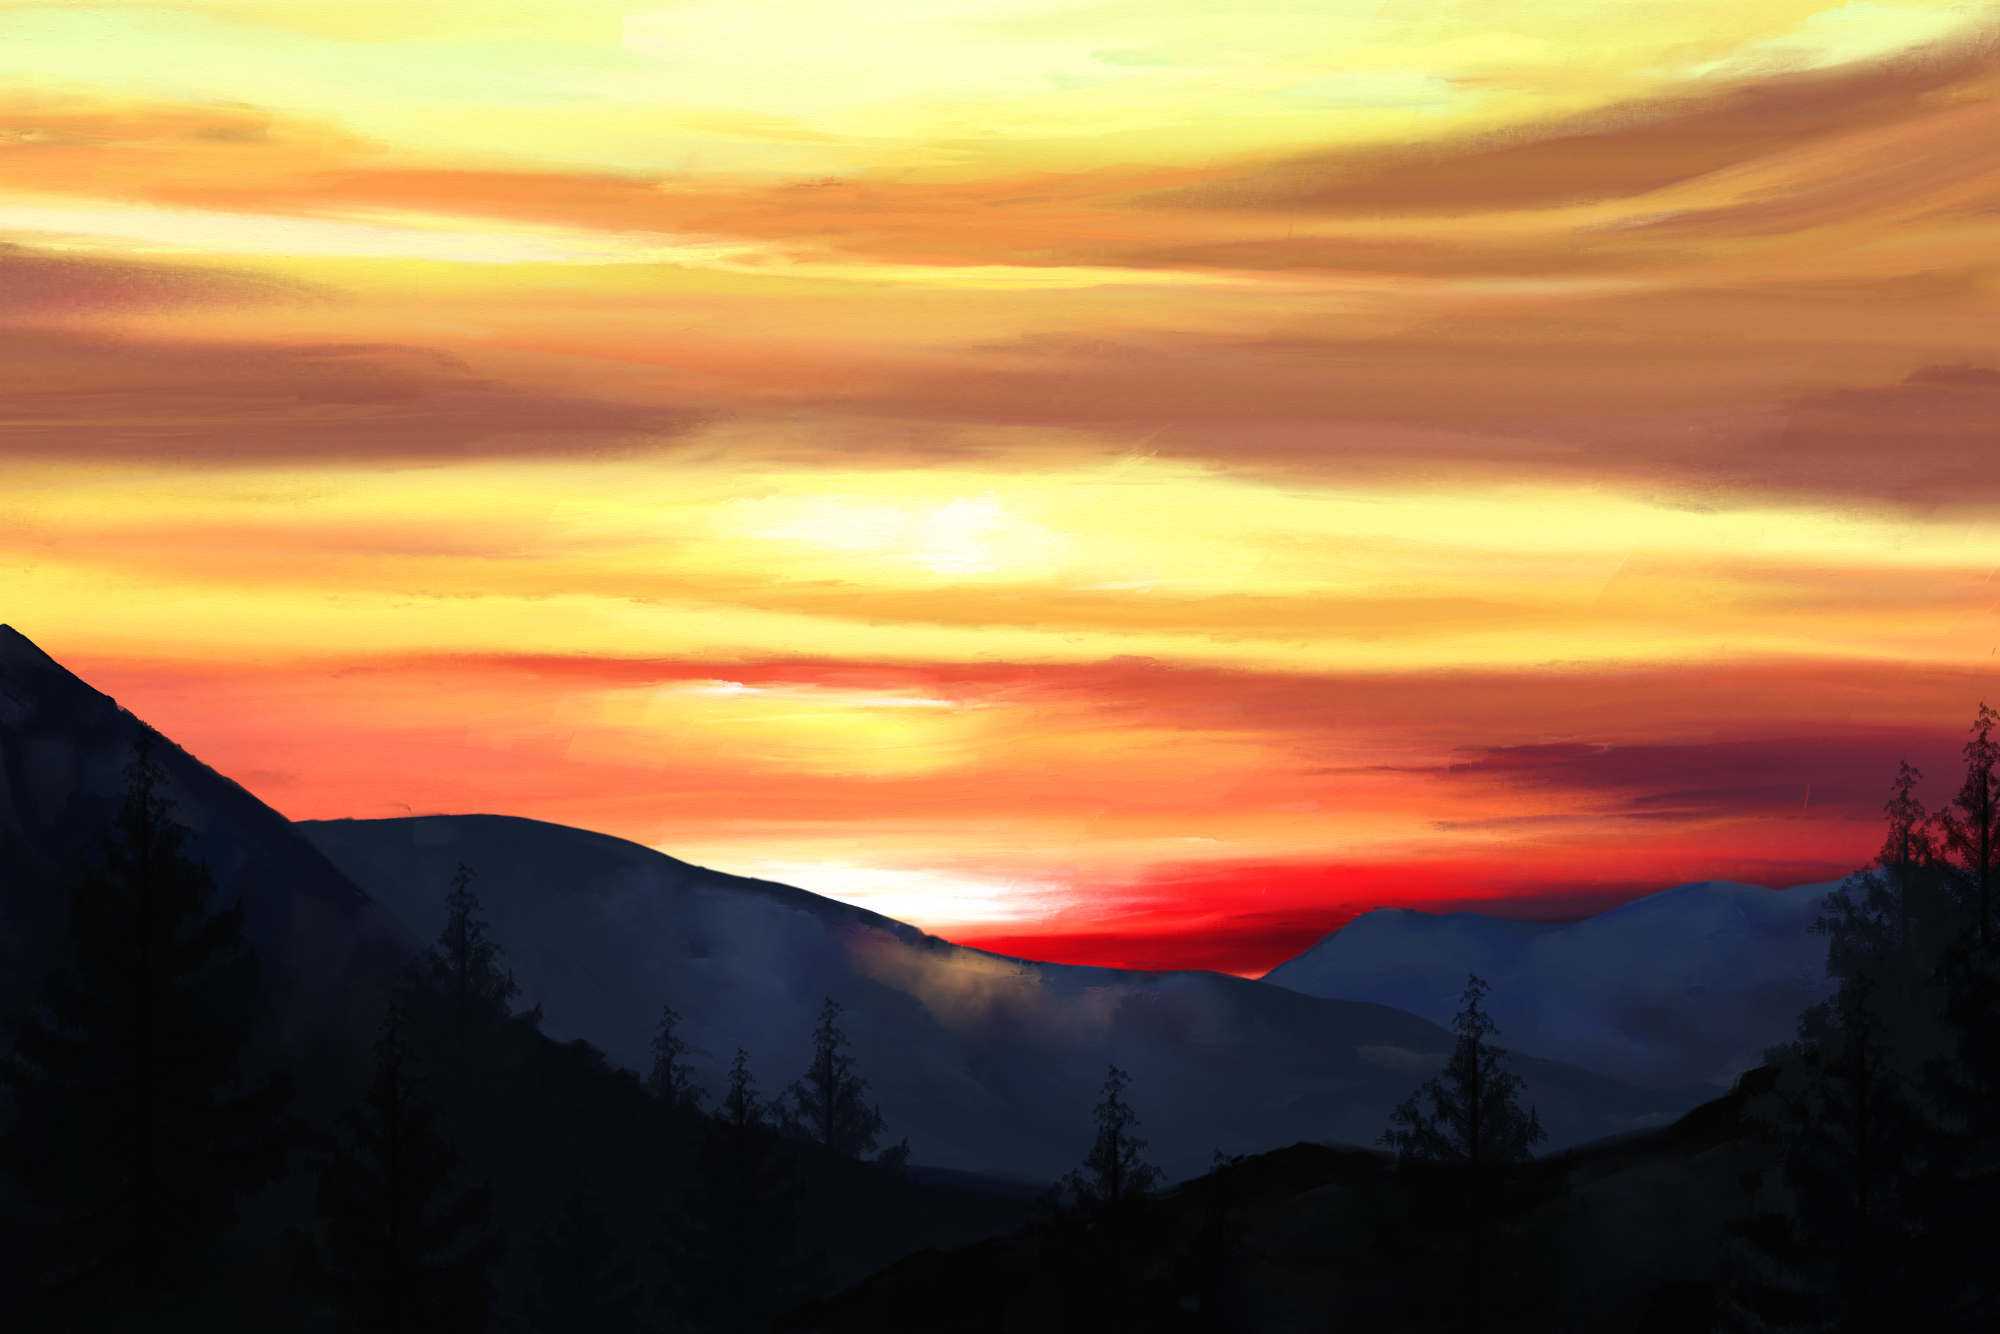 Digital acrylic painting of a landscape in the Golden Evening Sun